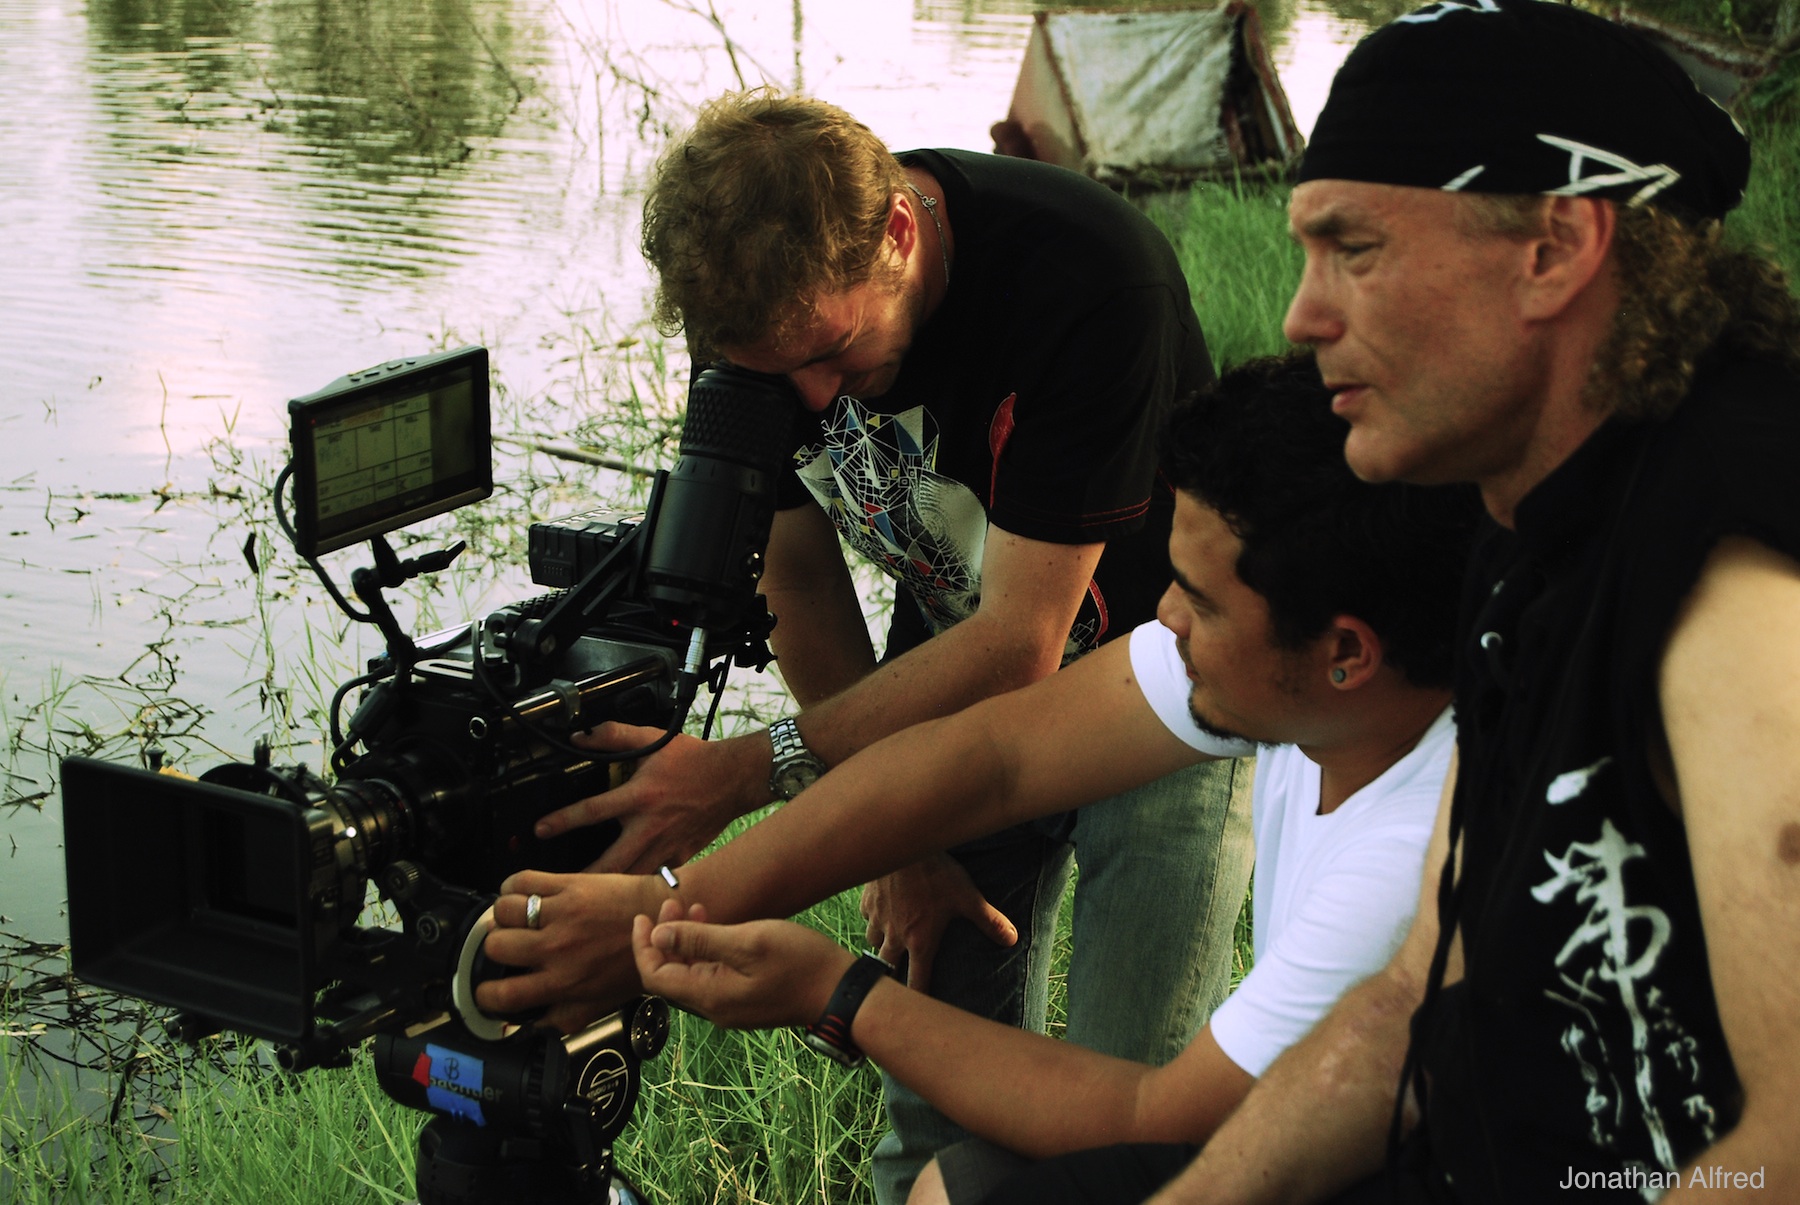 Roy on location in Thailand for GloryDays.